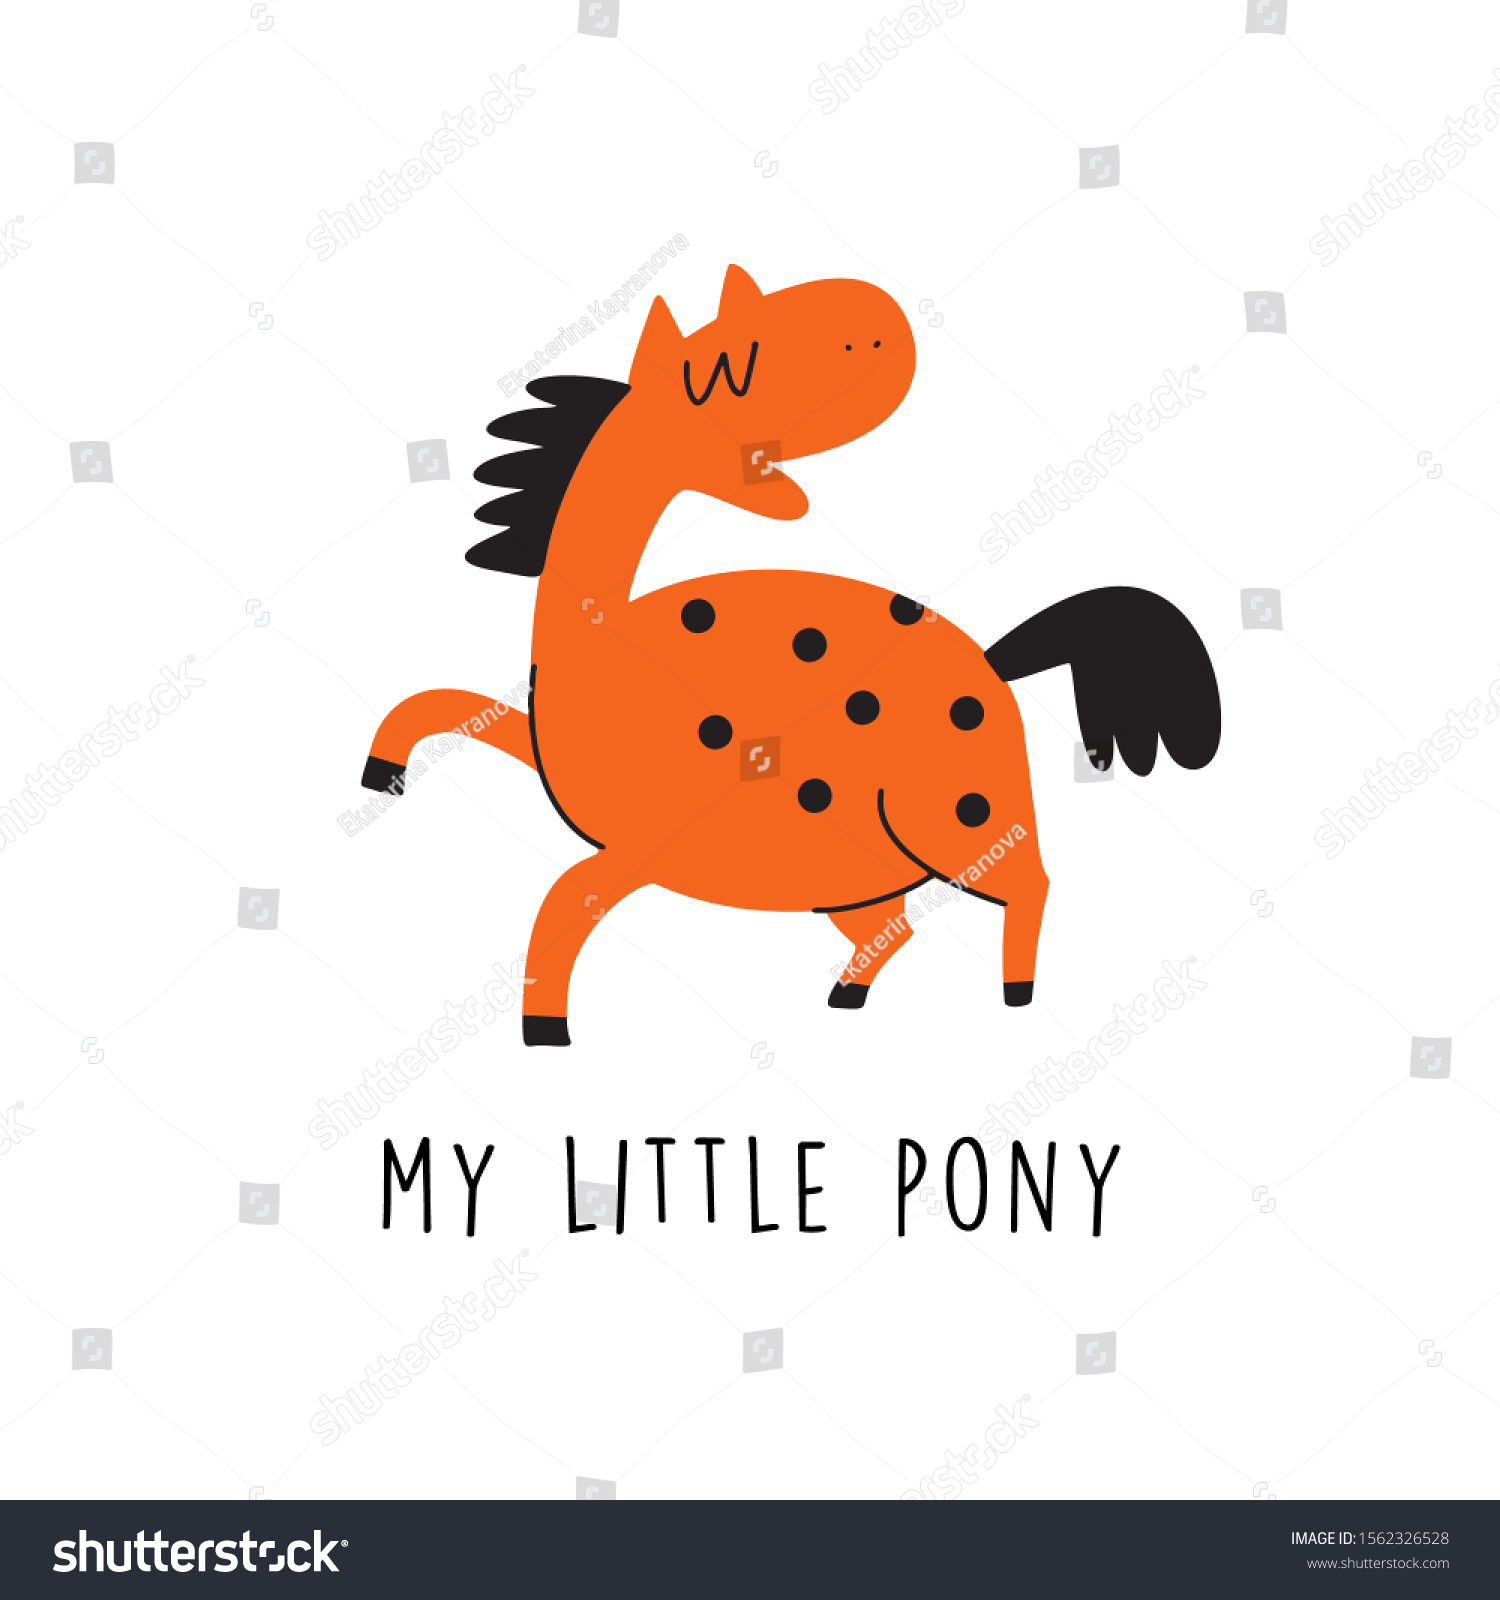 SVG of Vector cartoon illustration of funny horse or pony and text My Little pony svg